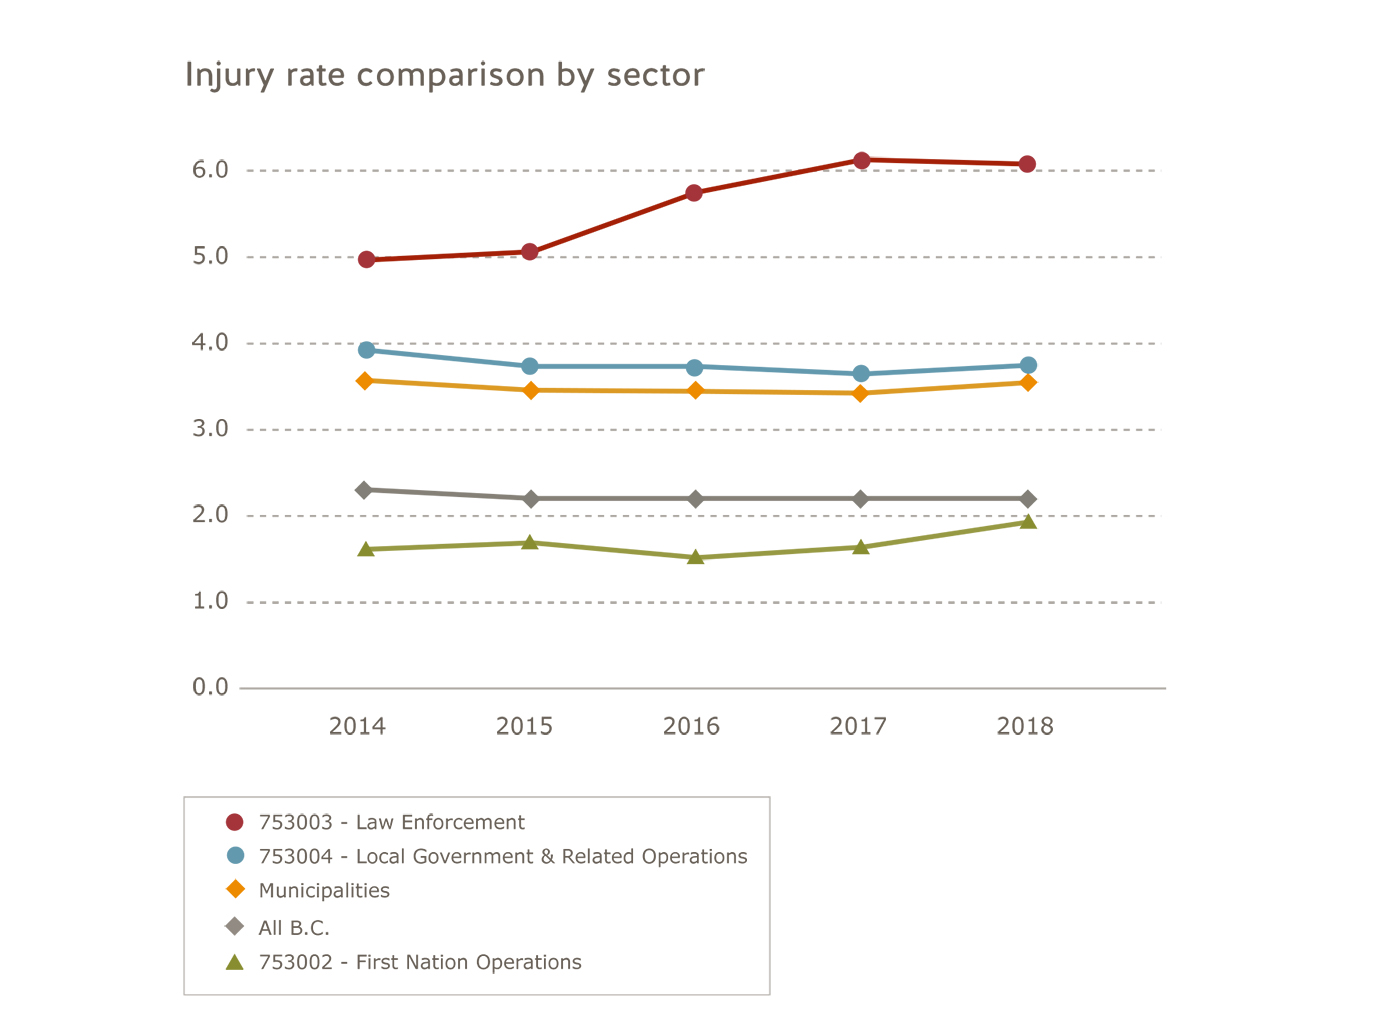 Municipalities sector injury rate comparison by sector for 2014 to 2018